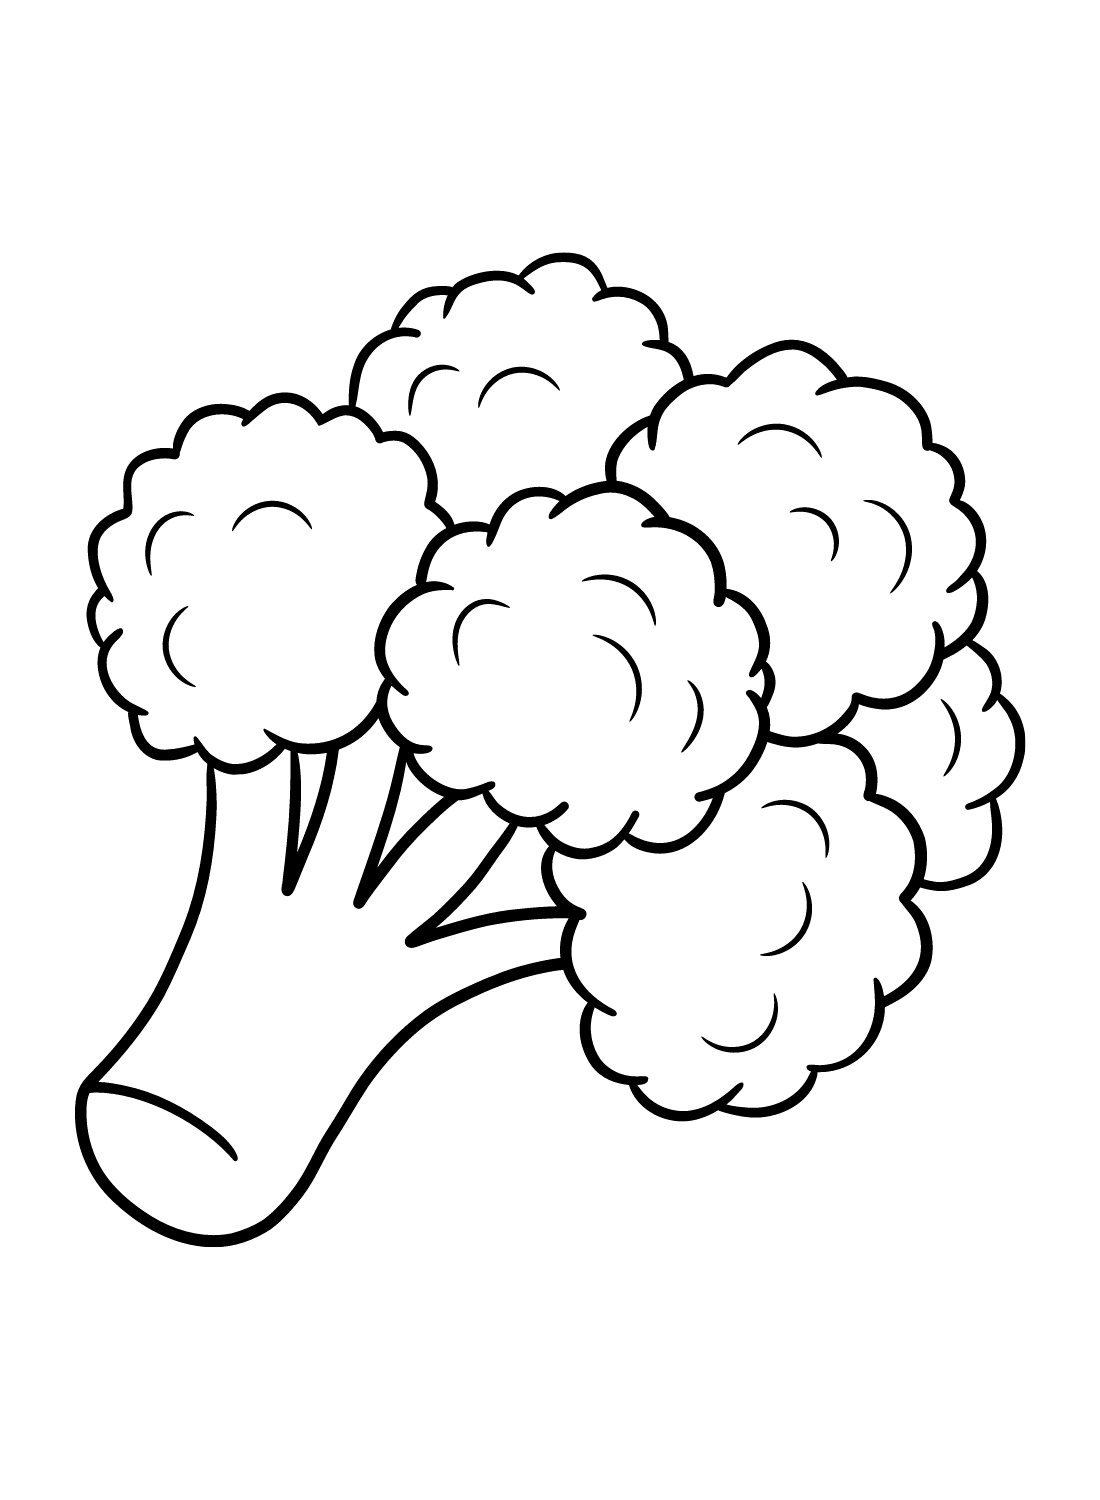 Green Broccoli for Kids Coloring Pages